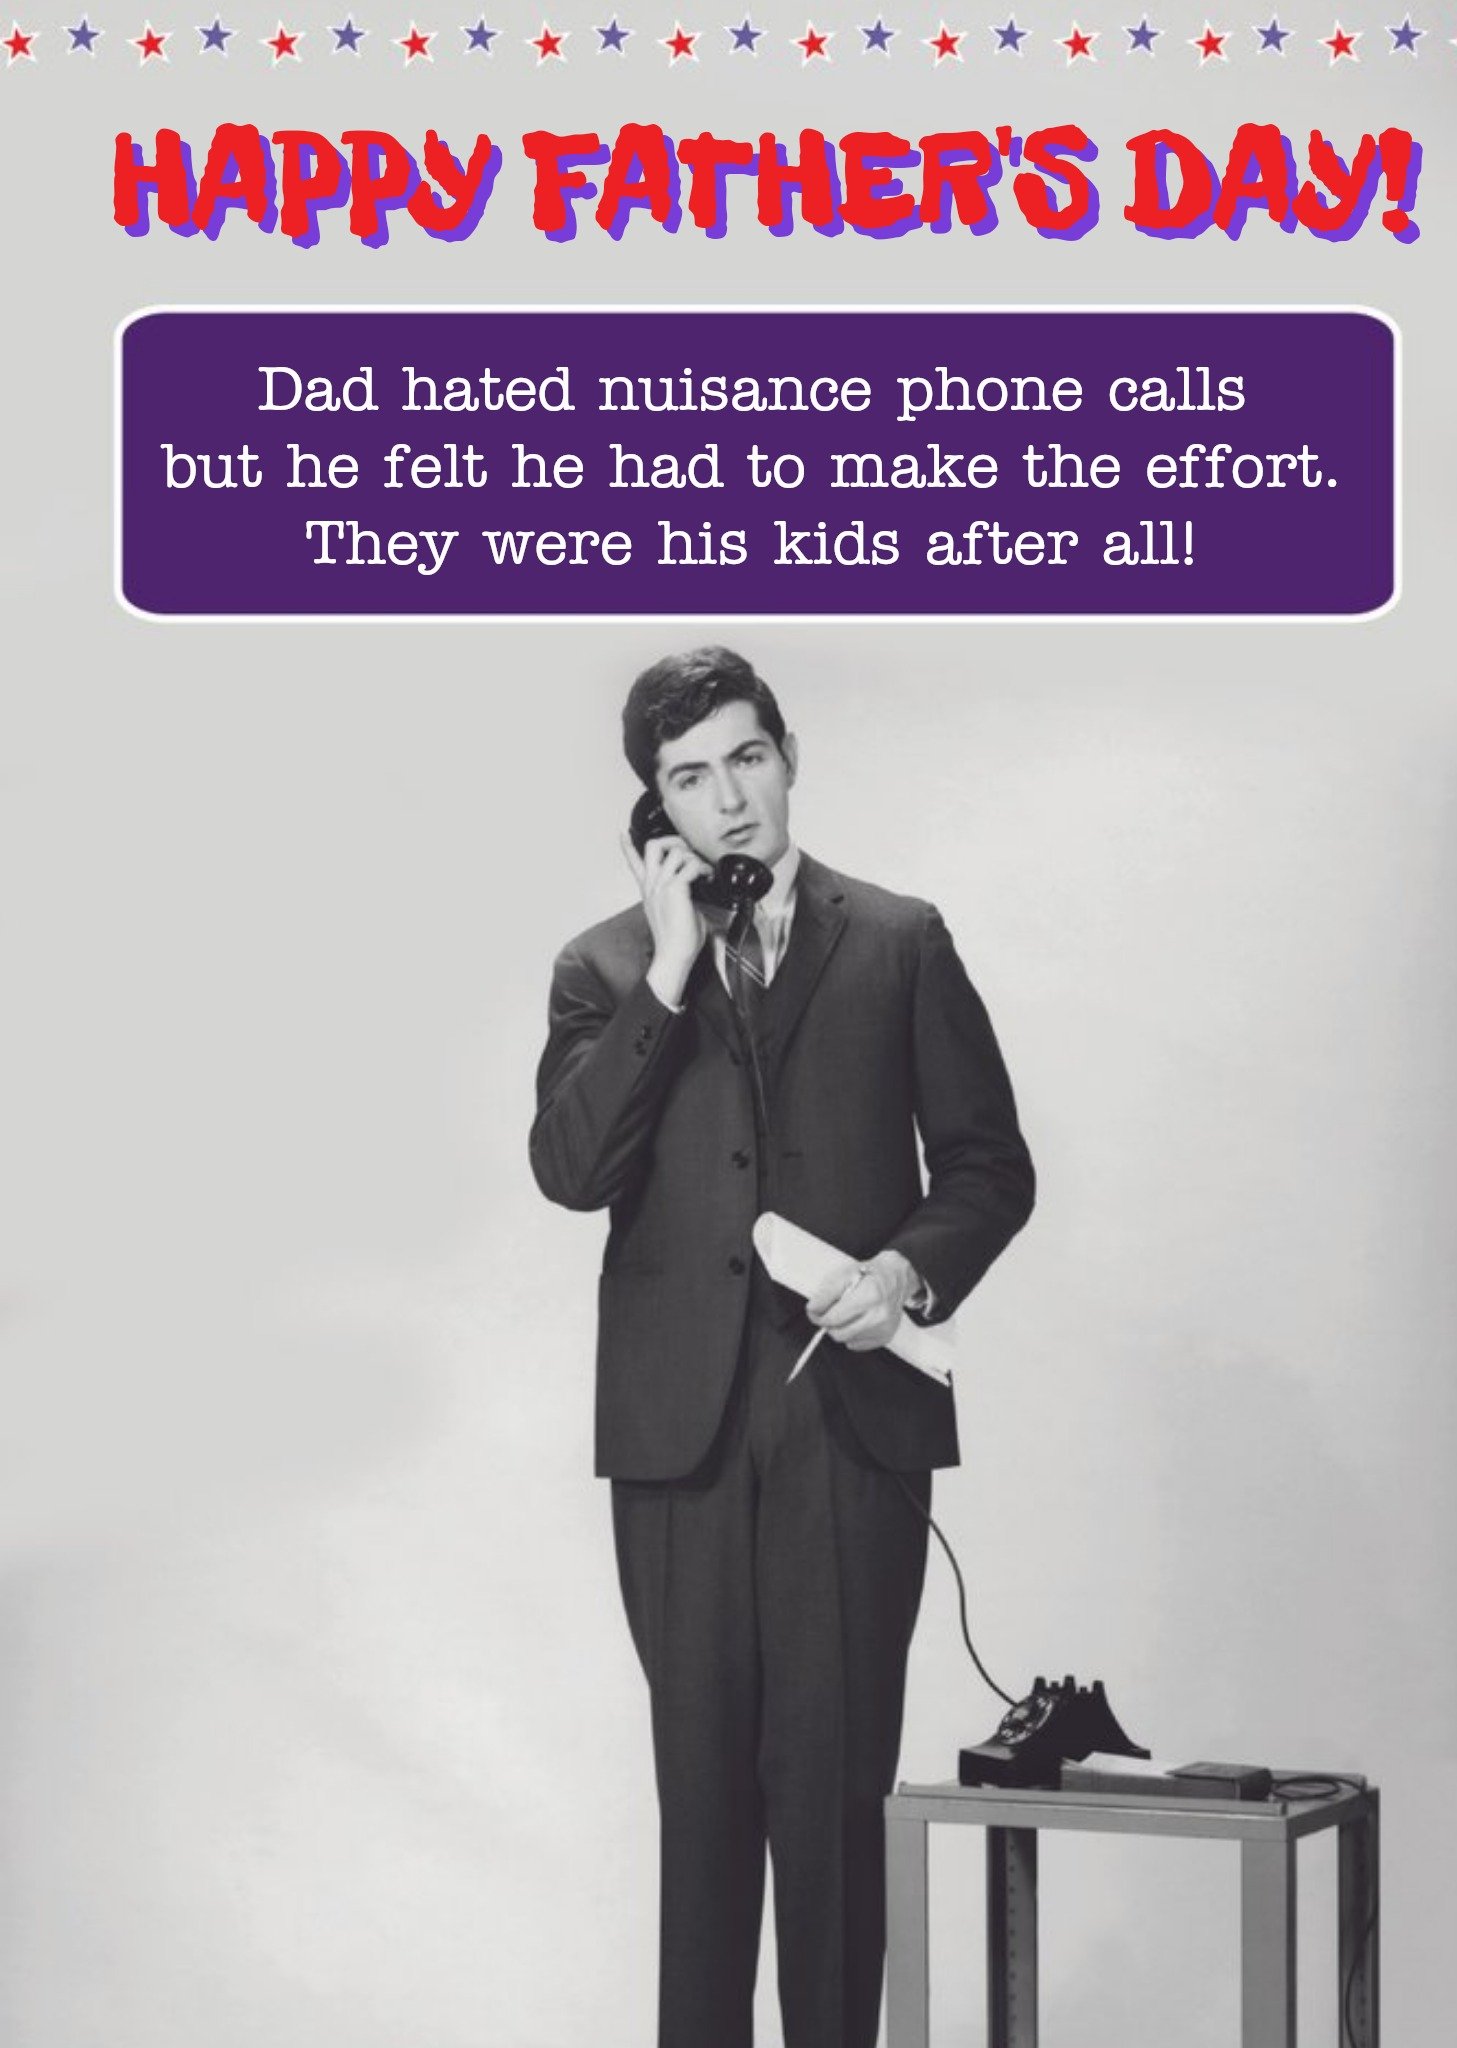 Moonpig Phone Calls Funny Caption Personalised Happy Father's Day Card, Large